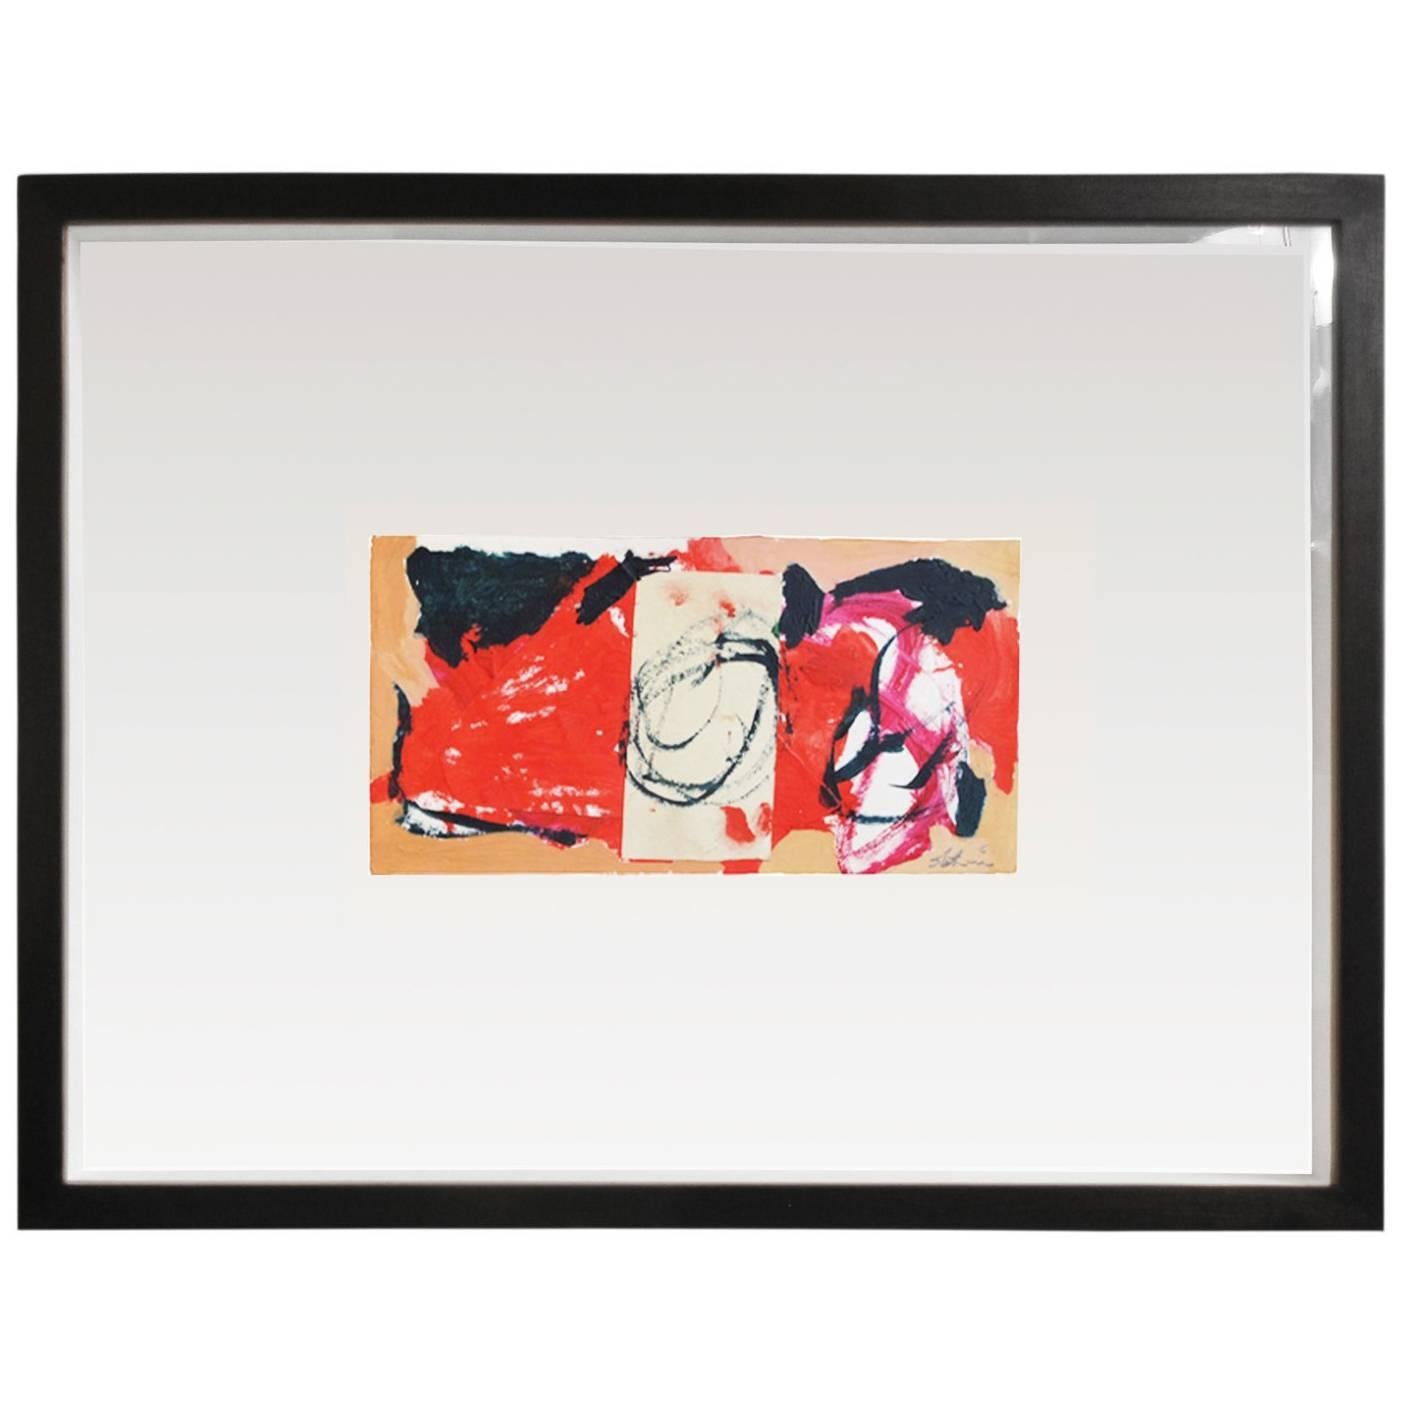 Small Mixed-Media Abstract in Black, Red and Tan